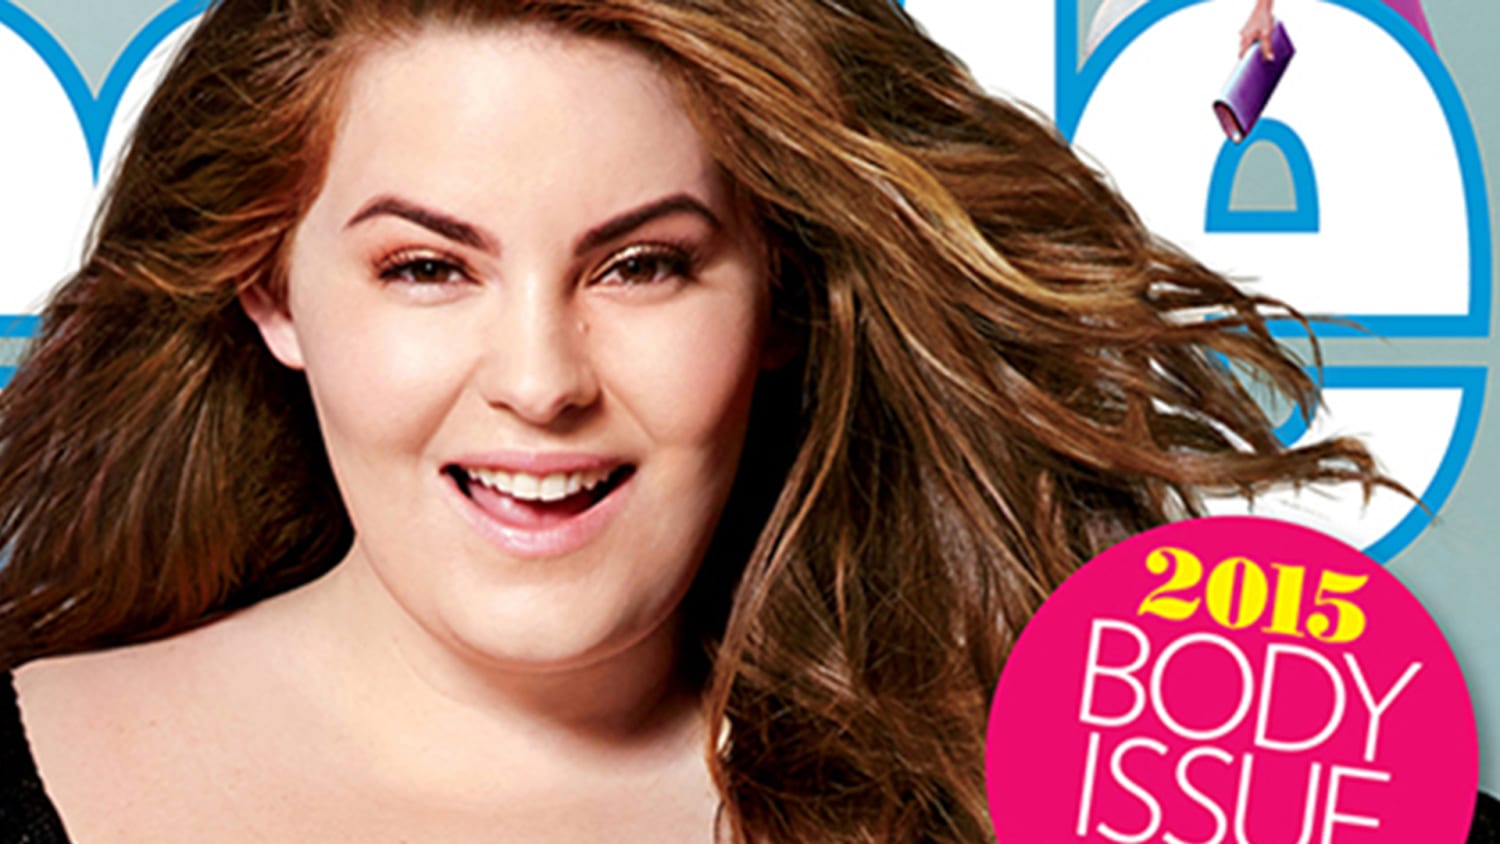 temperament absorberende Jordbær Tess Holliday, size 22, graces People magazine cover